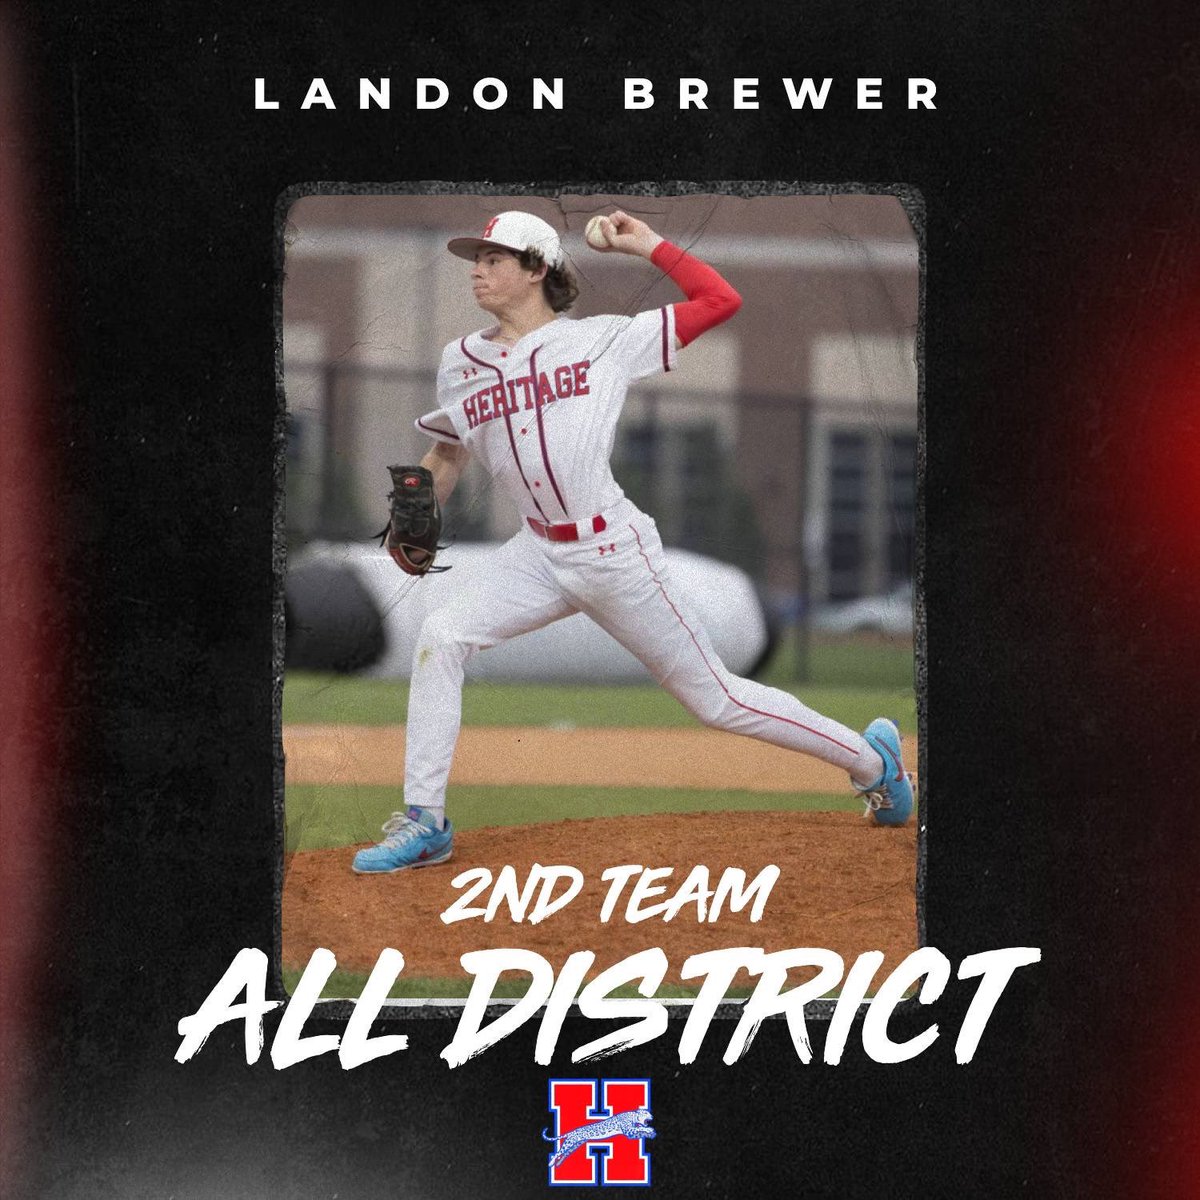 Congrats to @LandonB06 for being voted 2nd Team All District Pitcher!!